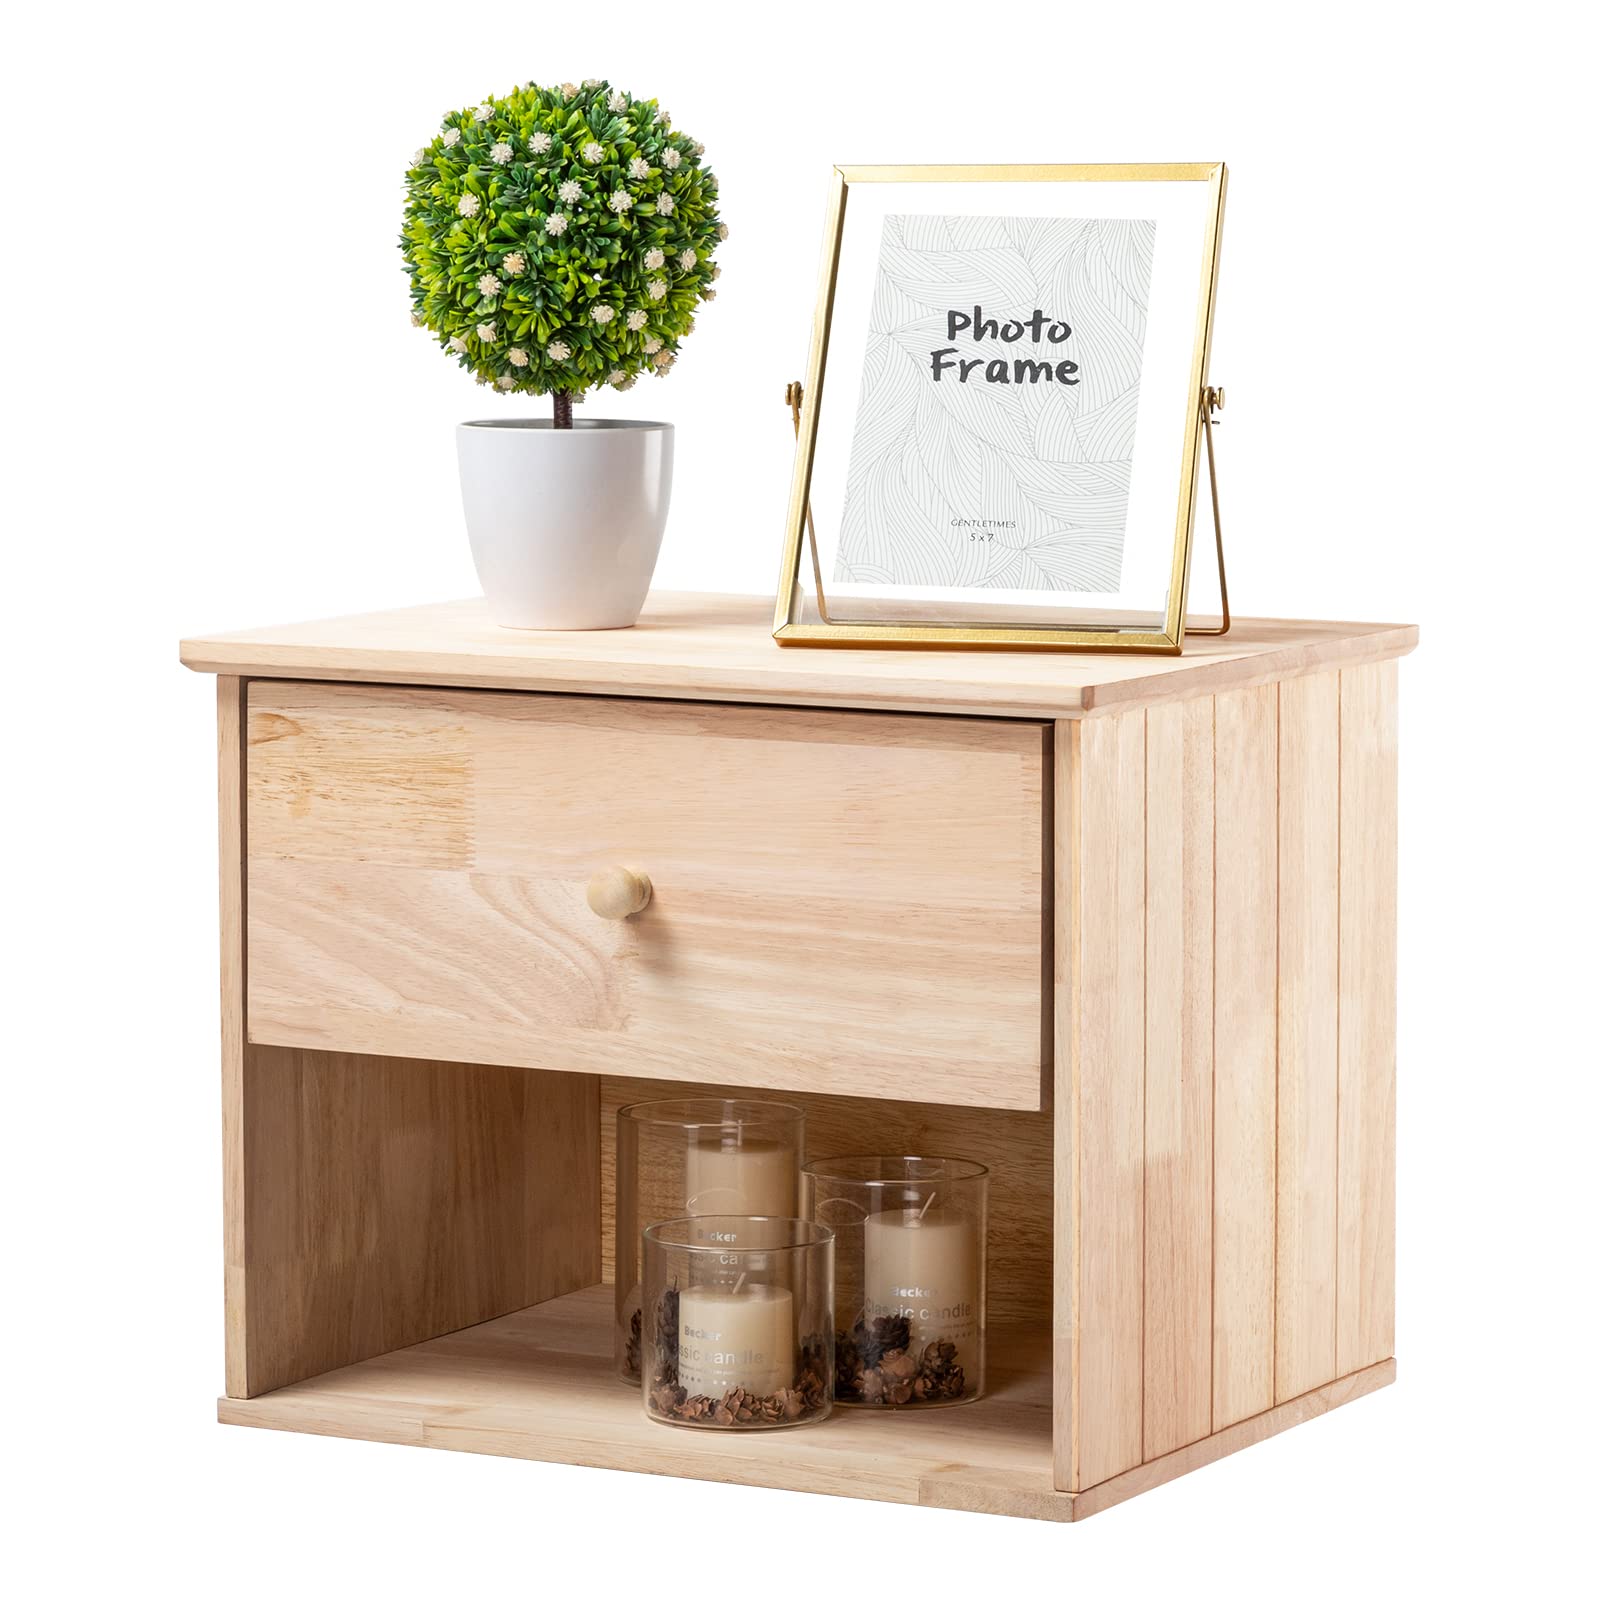  Eily Night Stand Bedside Table with Drawer Wooden Side